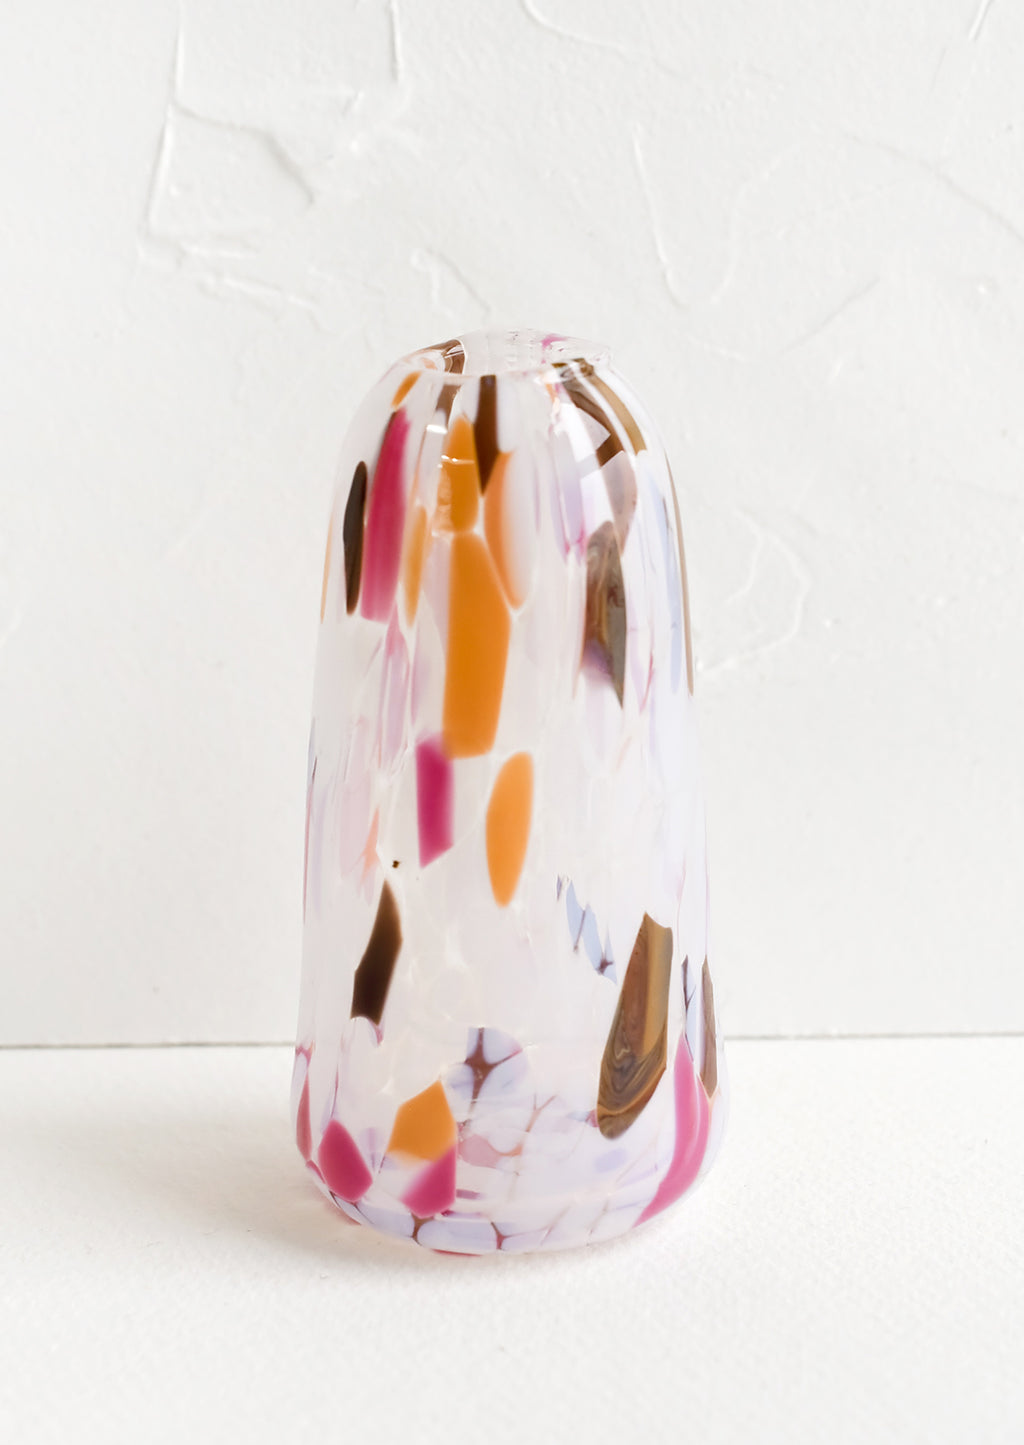 Tapered: A tall tapered bud vase in glass with orange, brown and pink speckles.